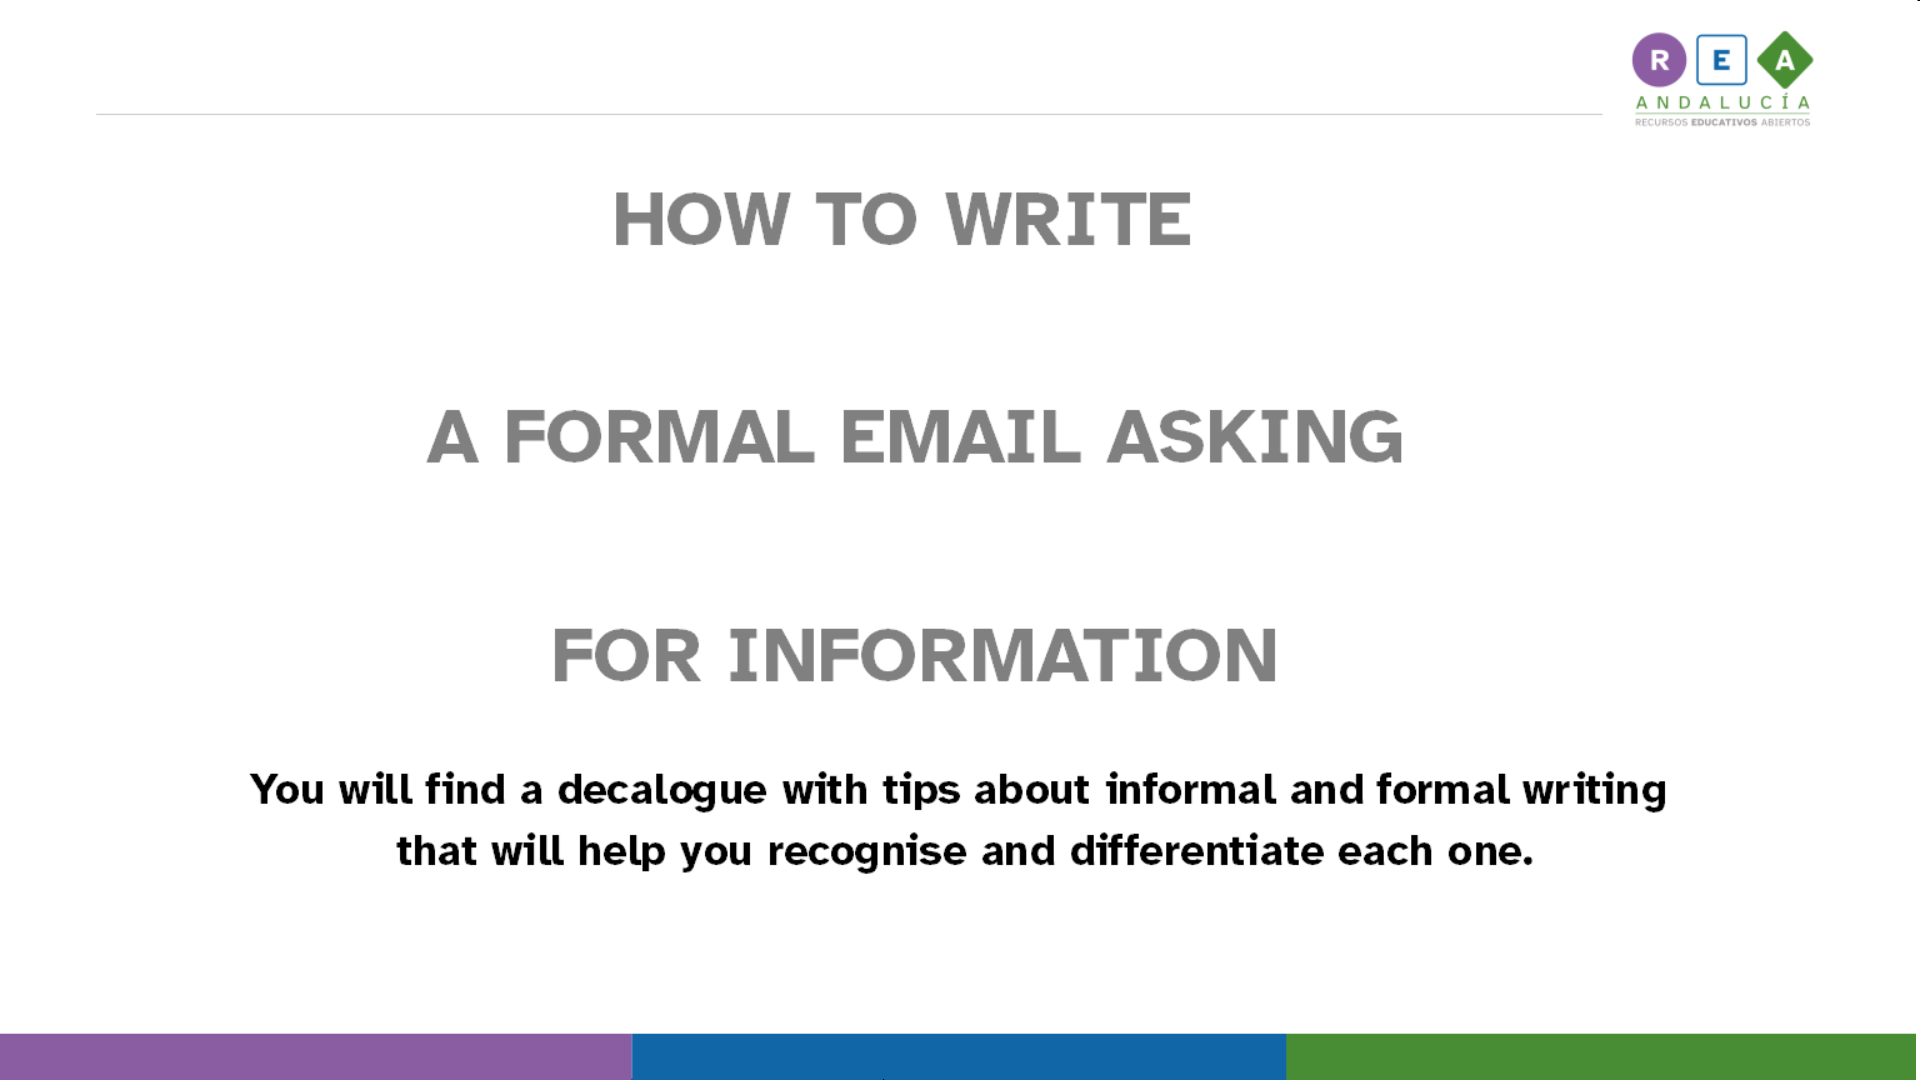 La imagen muestra un texto que indica HOW TO WRITE  A FORMAL EMAIL ASKING  FOR INFORMATION  You will find a decalogue with tips about informal and  formal writing  that will help you recognise and differentiate each one.